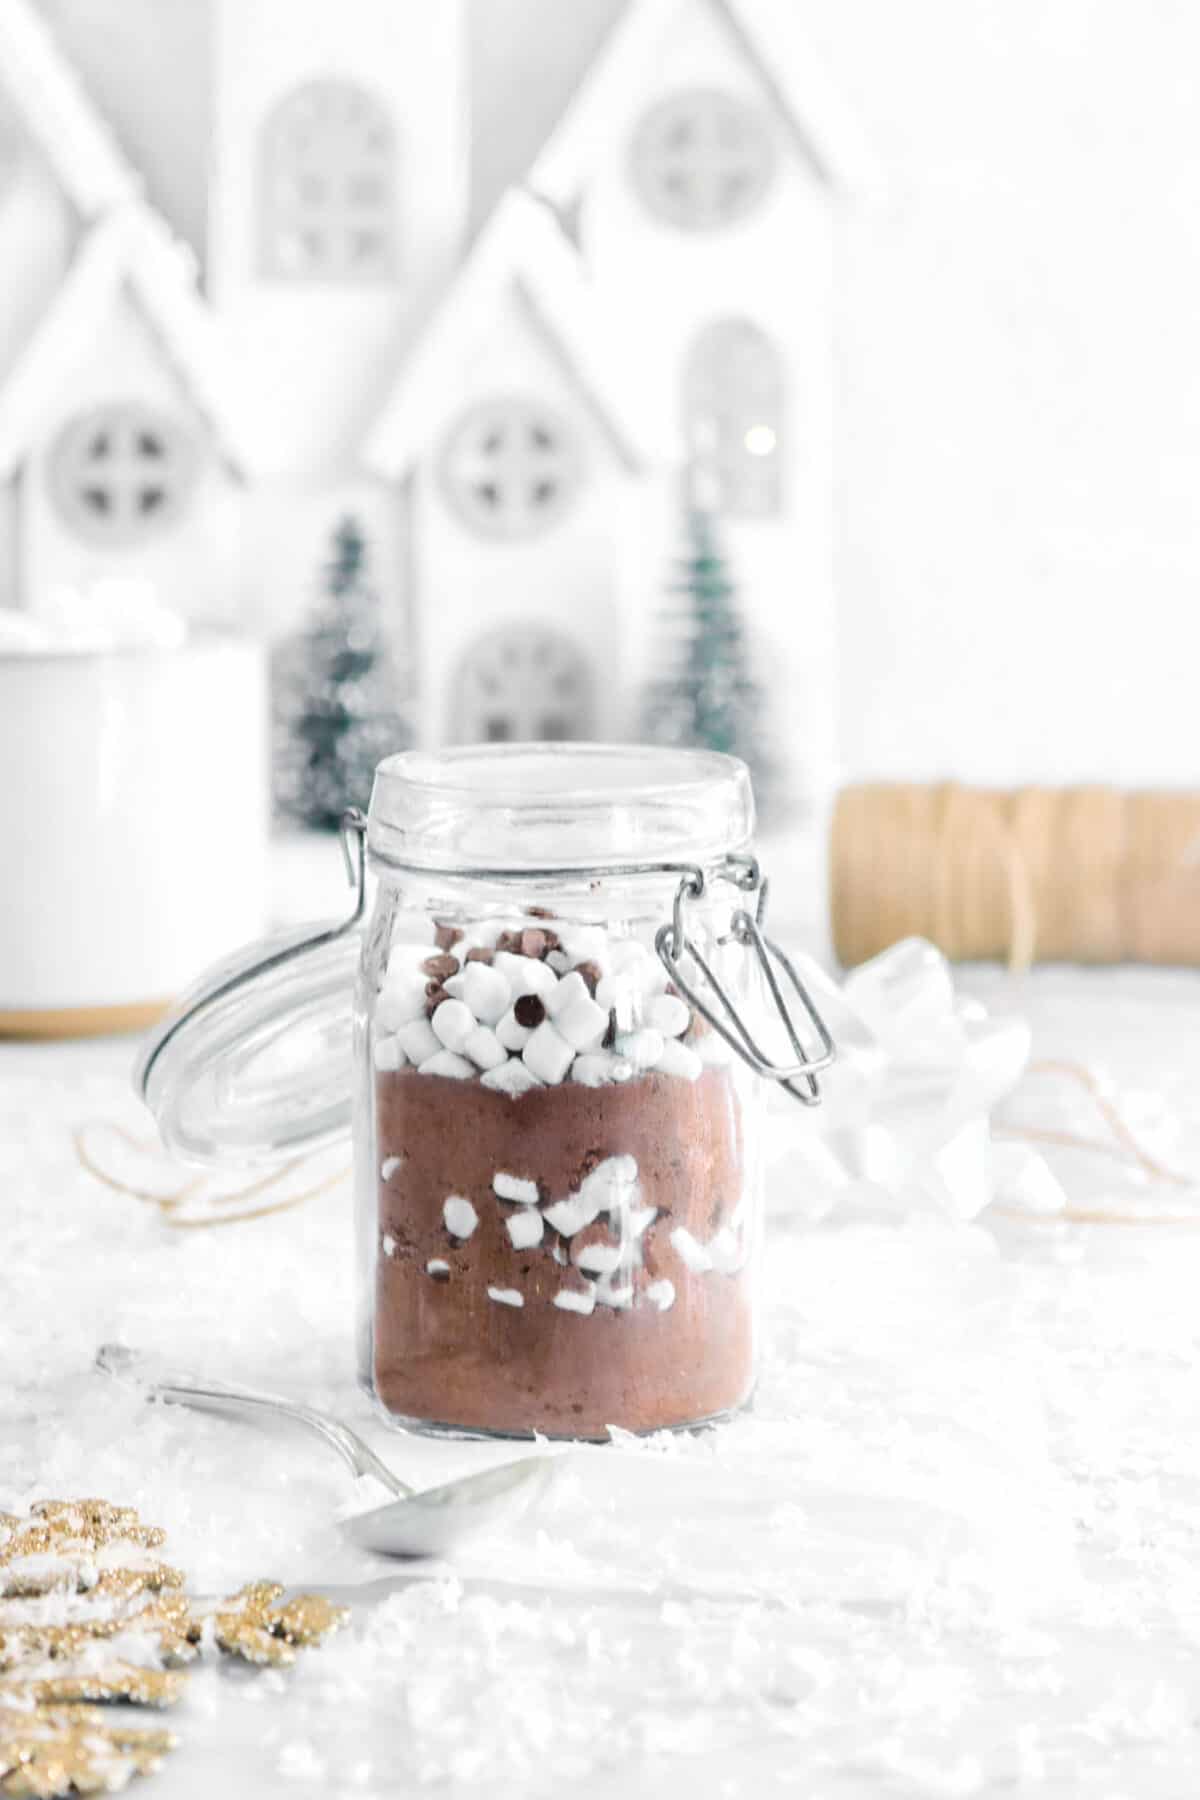 glass jar of cocoa mix with a gold slow flake, a mug, and white houses behind